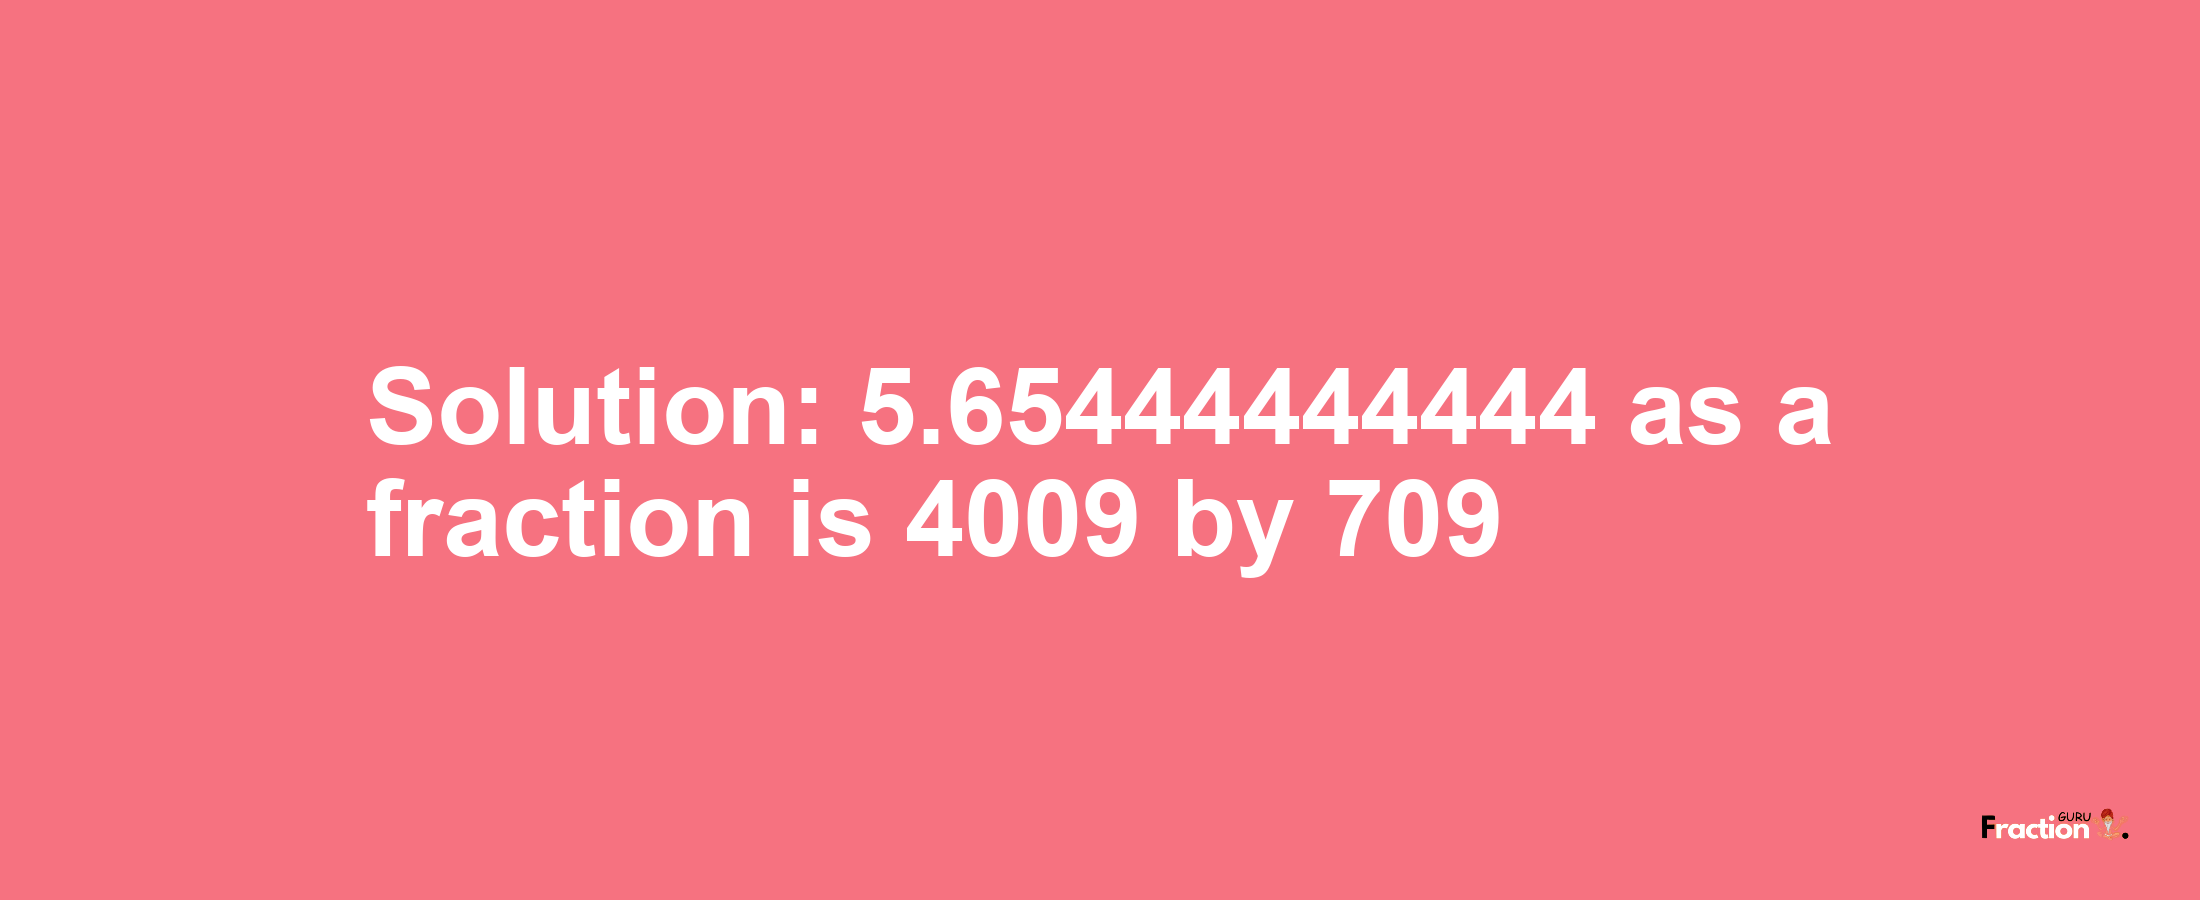 Solution:5.65444444444 as a fraction is 4009/709